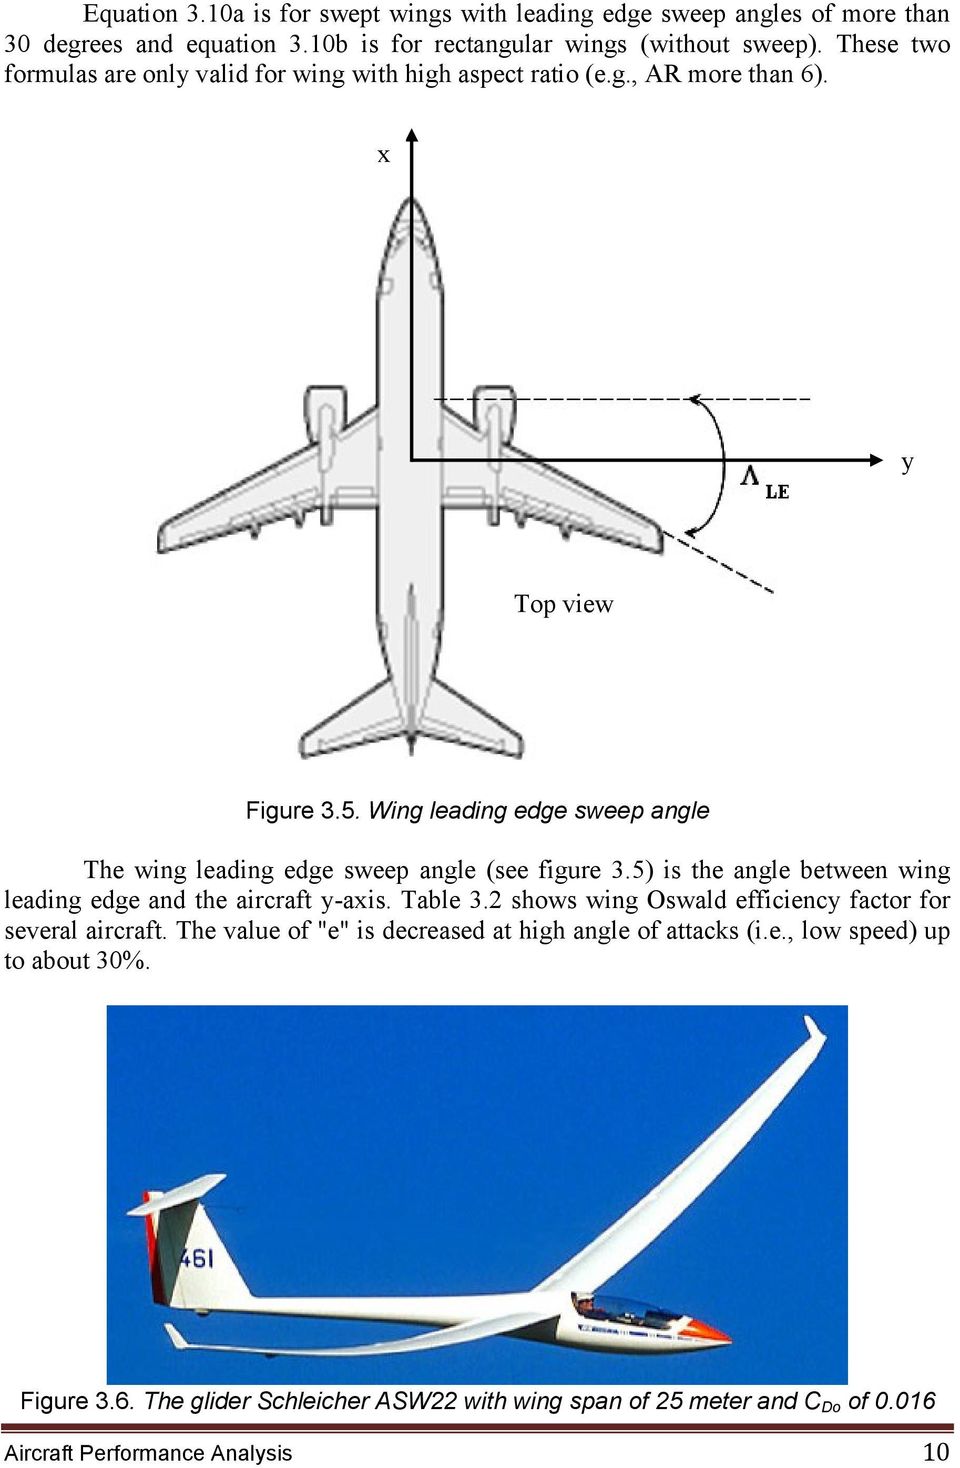 Wing leading edge sweep angle The wing leading edge sweep angle (see figure 3.5) is the angle between wing leading edge and the aircraft y-axis. Table 3.